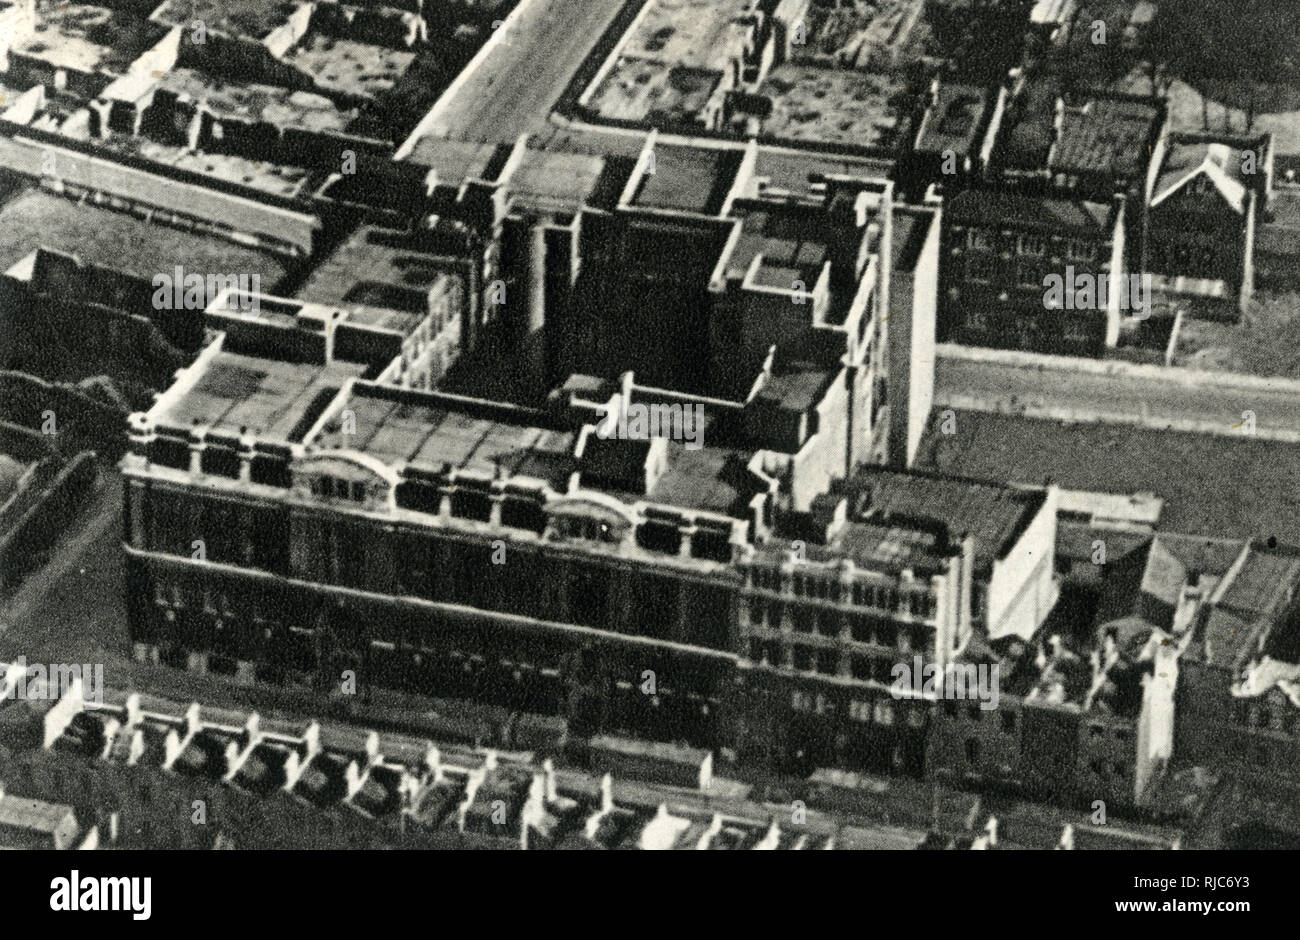 Aerial view of Bovril factory, Old Street, London Stock Photo